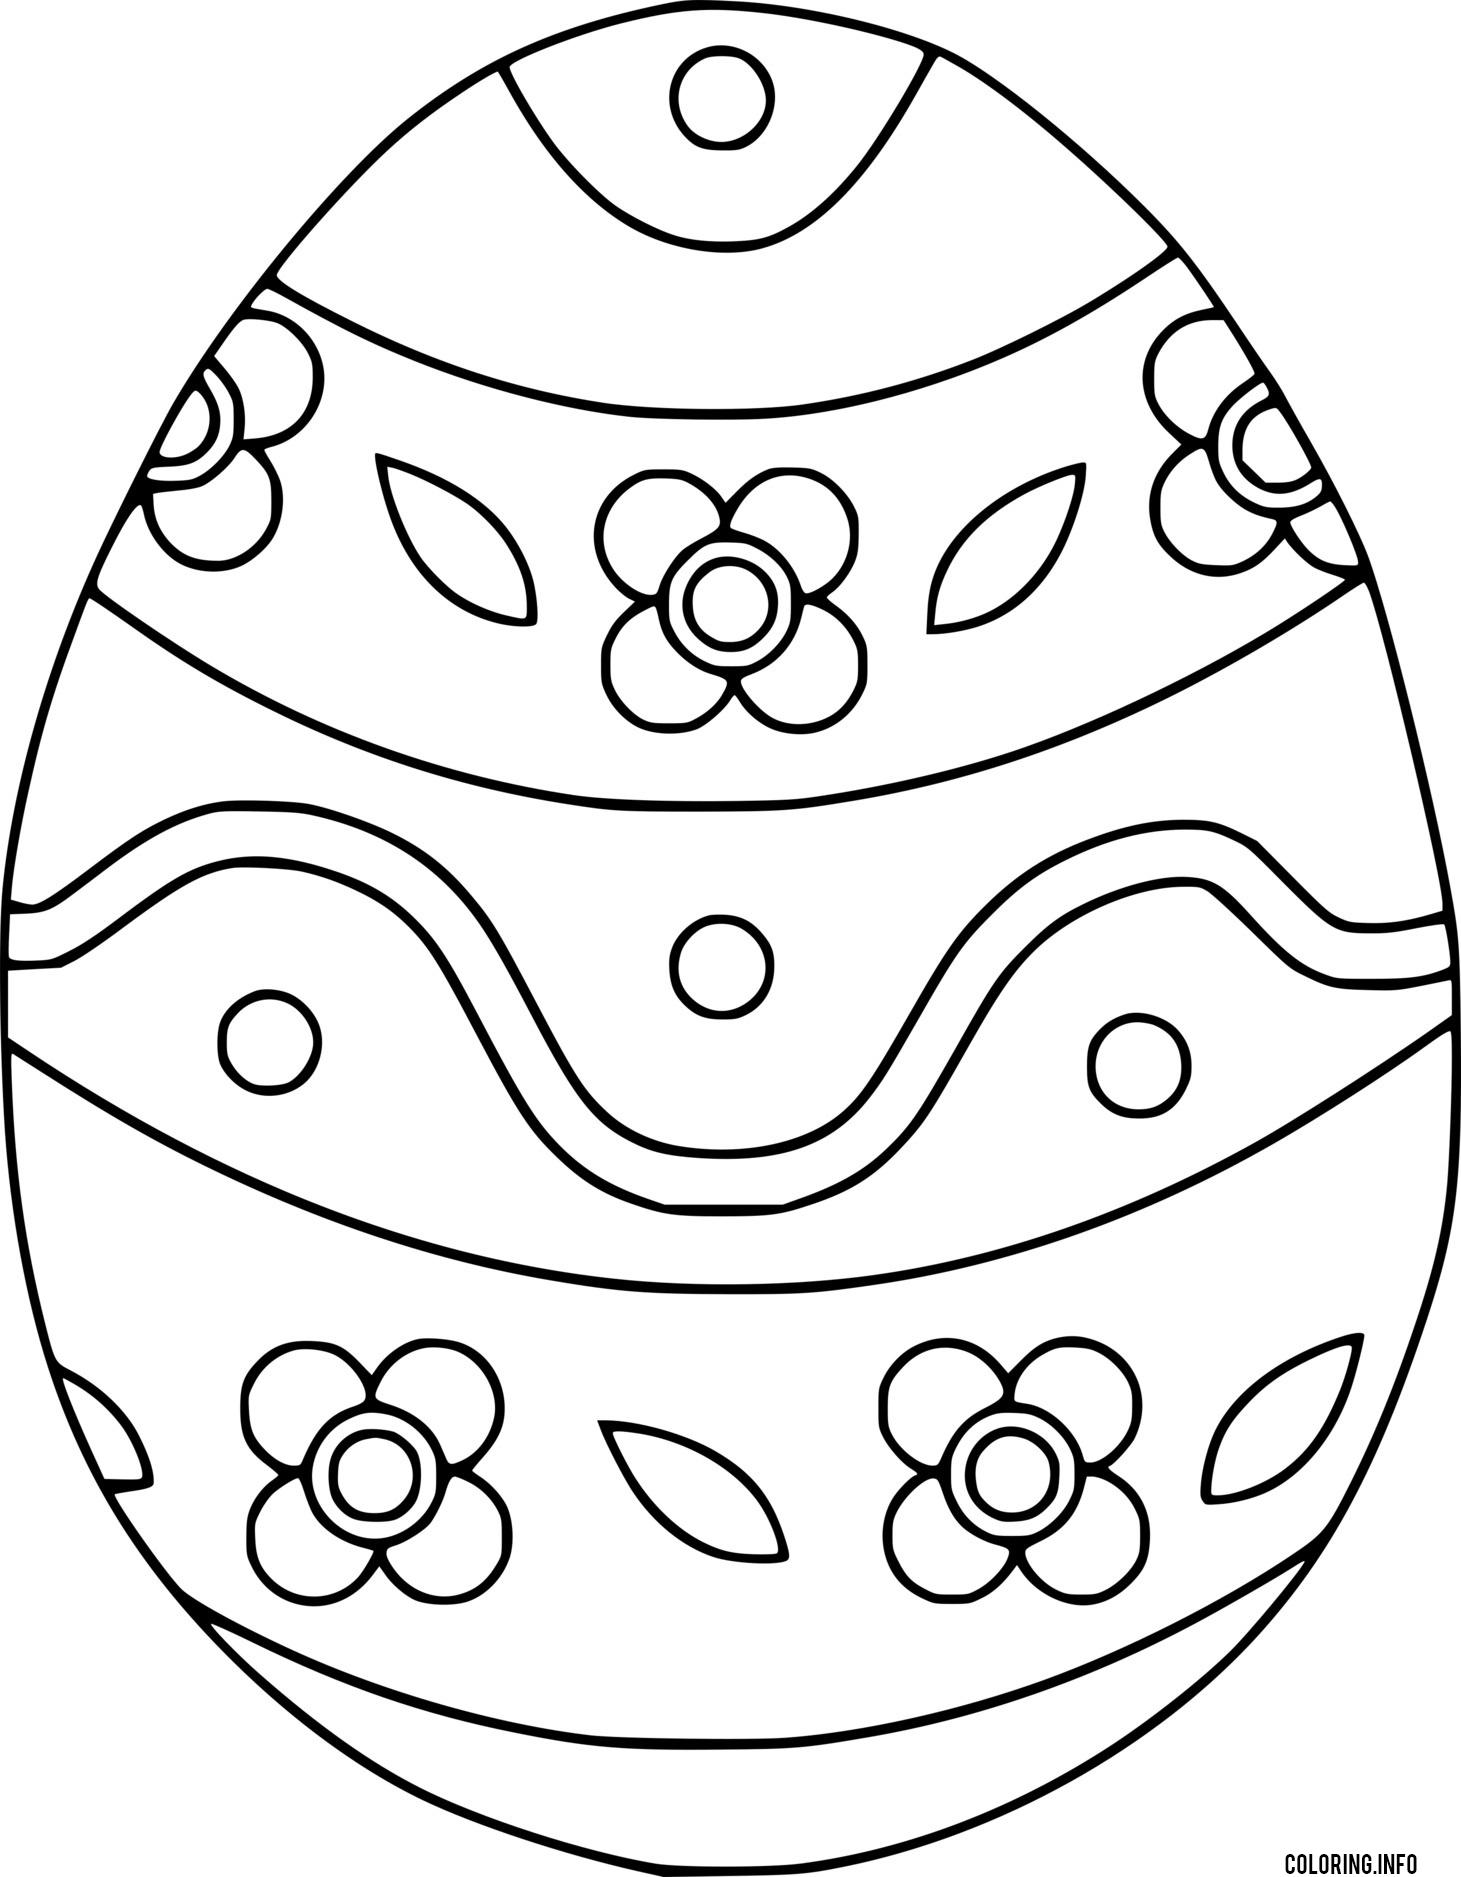 Easter Egg With Flowers And Leafs coloring